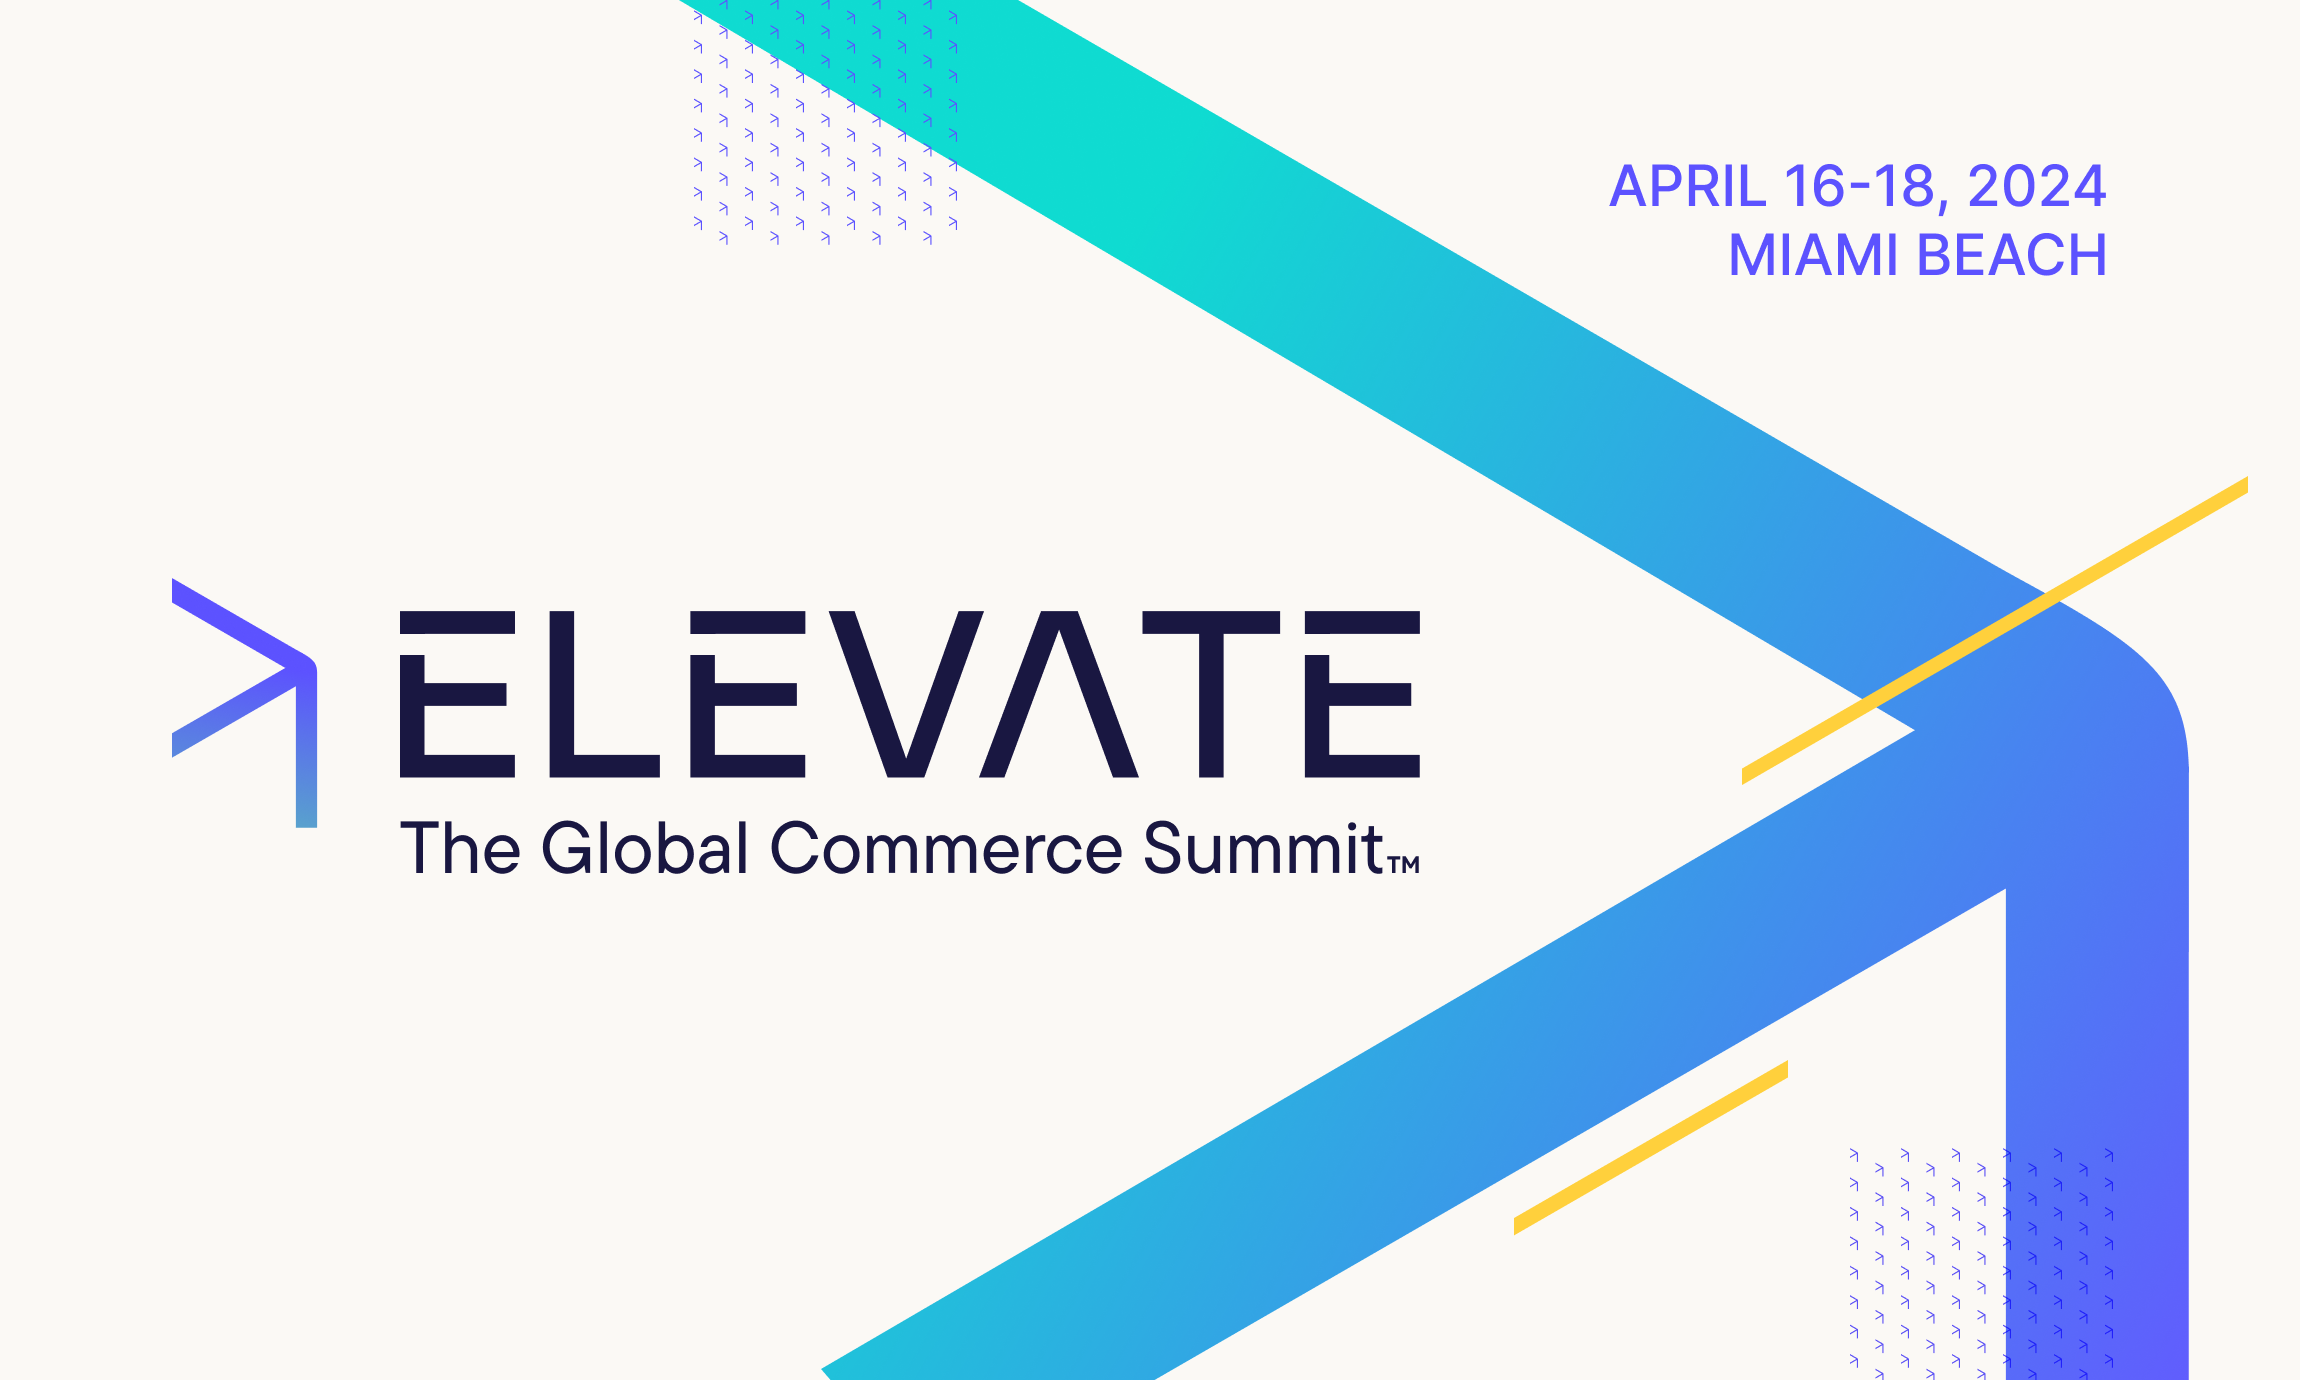 commercetools unveils lineup for 2024 Elevate